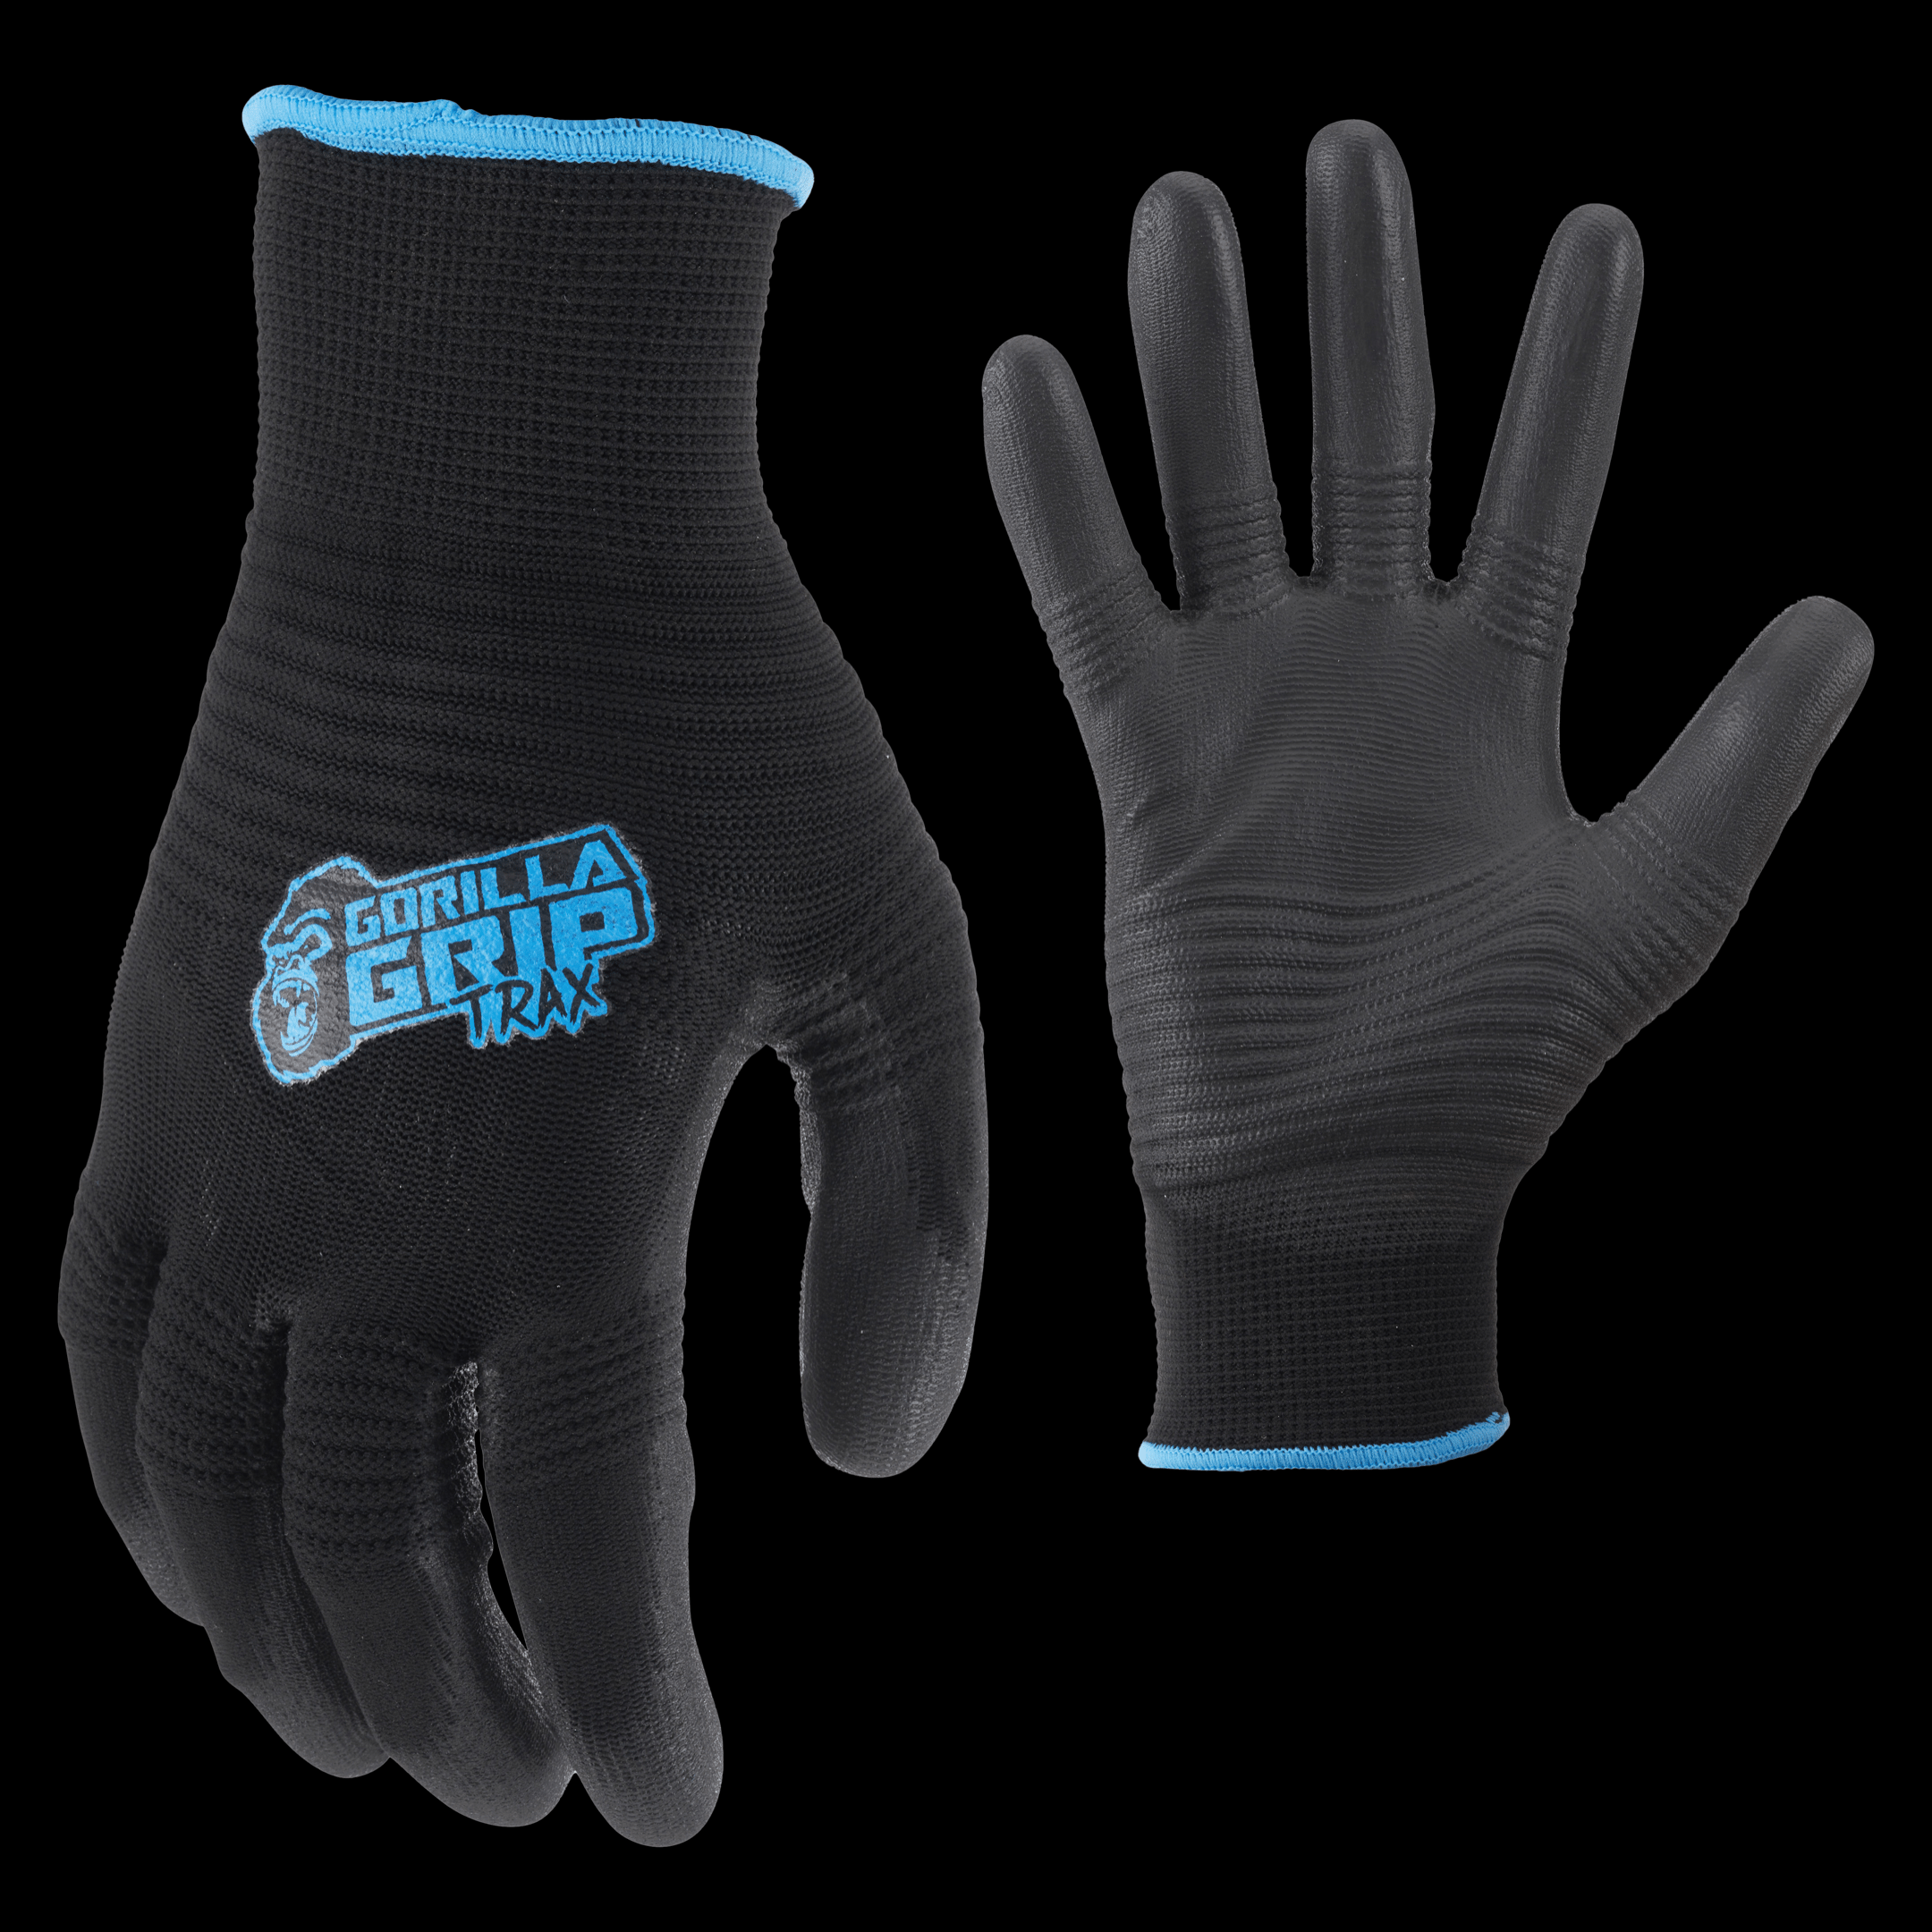 https://www.gorillagripgloves.com/wp-content/uploads/2022/04/trax_image_1.png